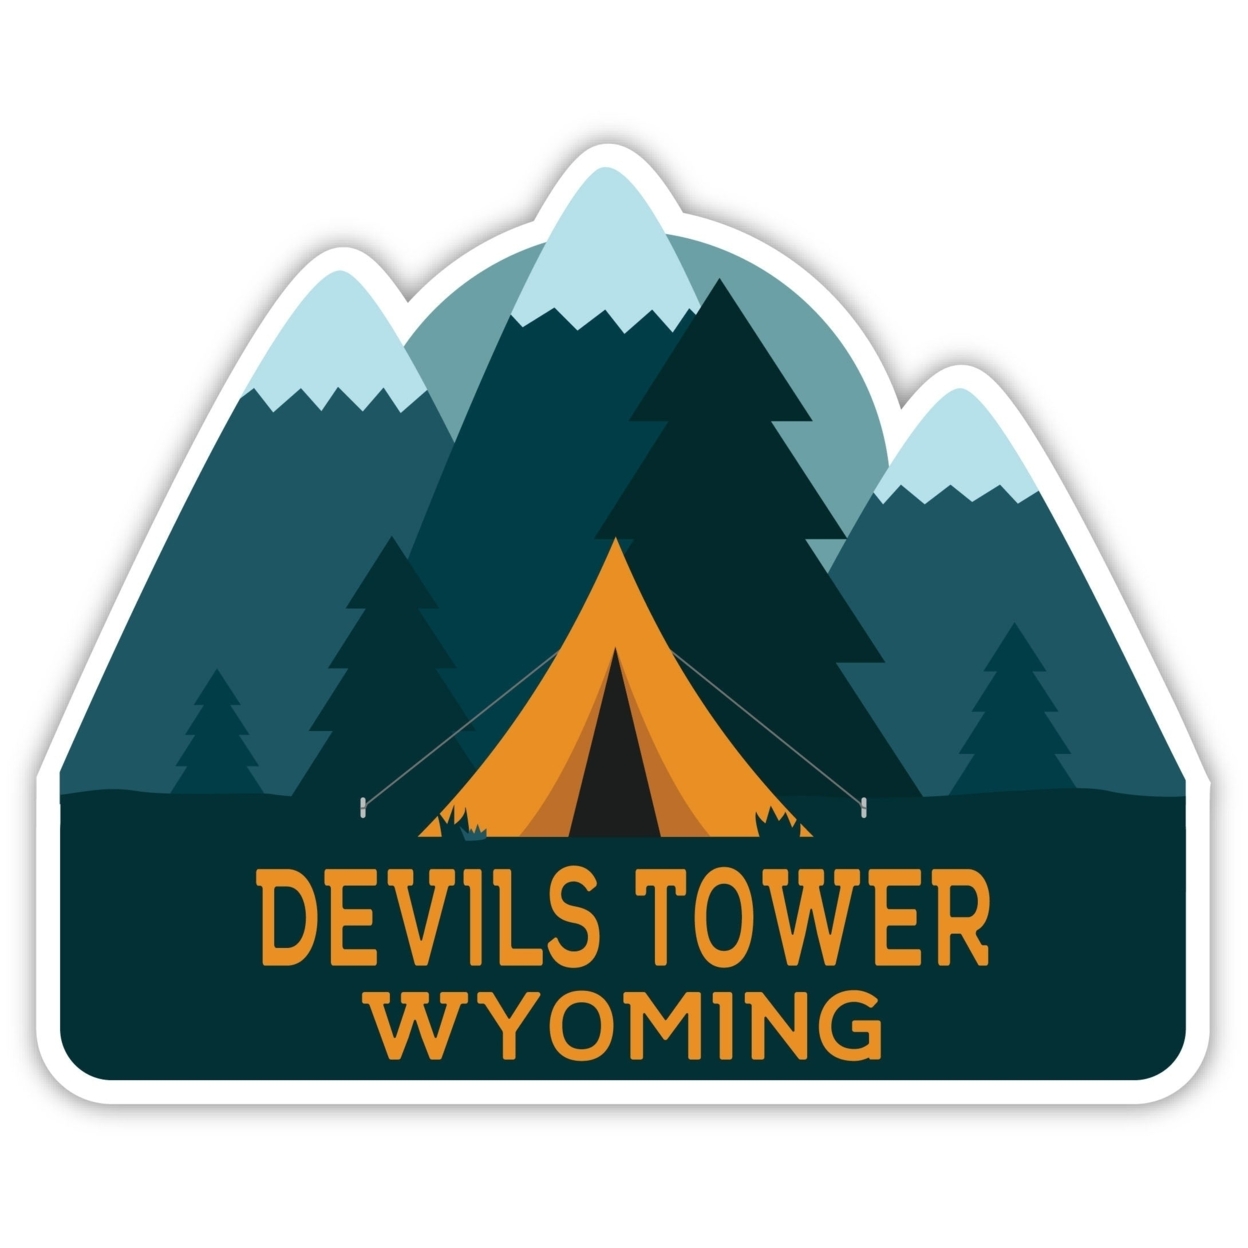 Devils Tower Wyoming Souvenir Decorative Stickers (Choose Theme And Size) - Single Unit, 12-Inch, Tent